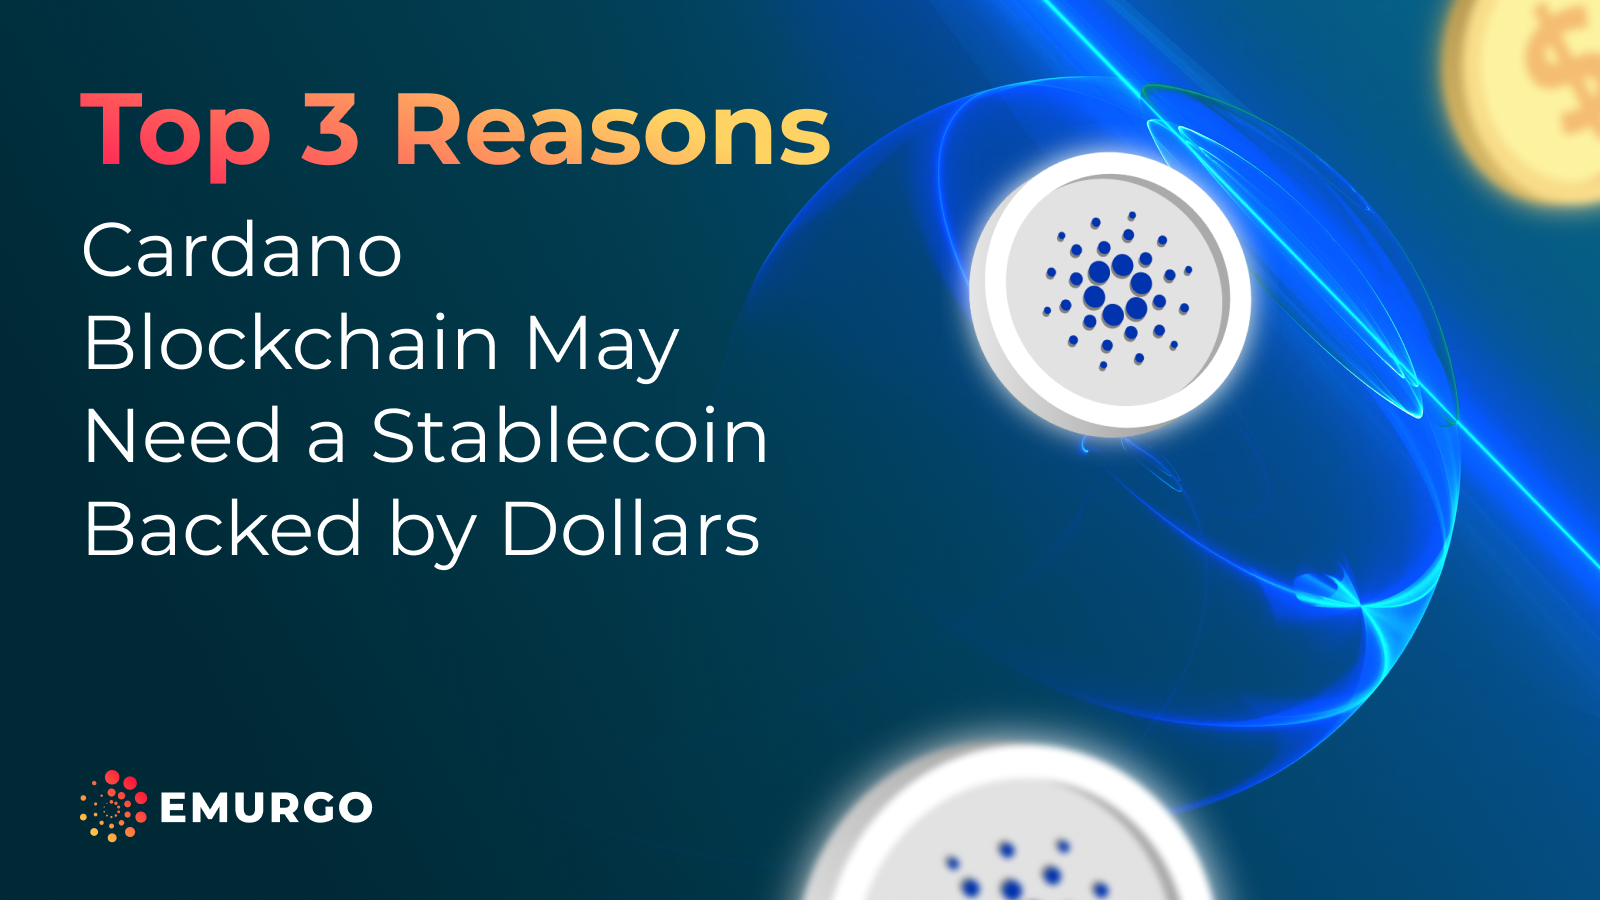 Top three reasons the Cardano blockchain may need a stablecoin backed by dollars